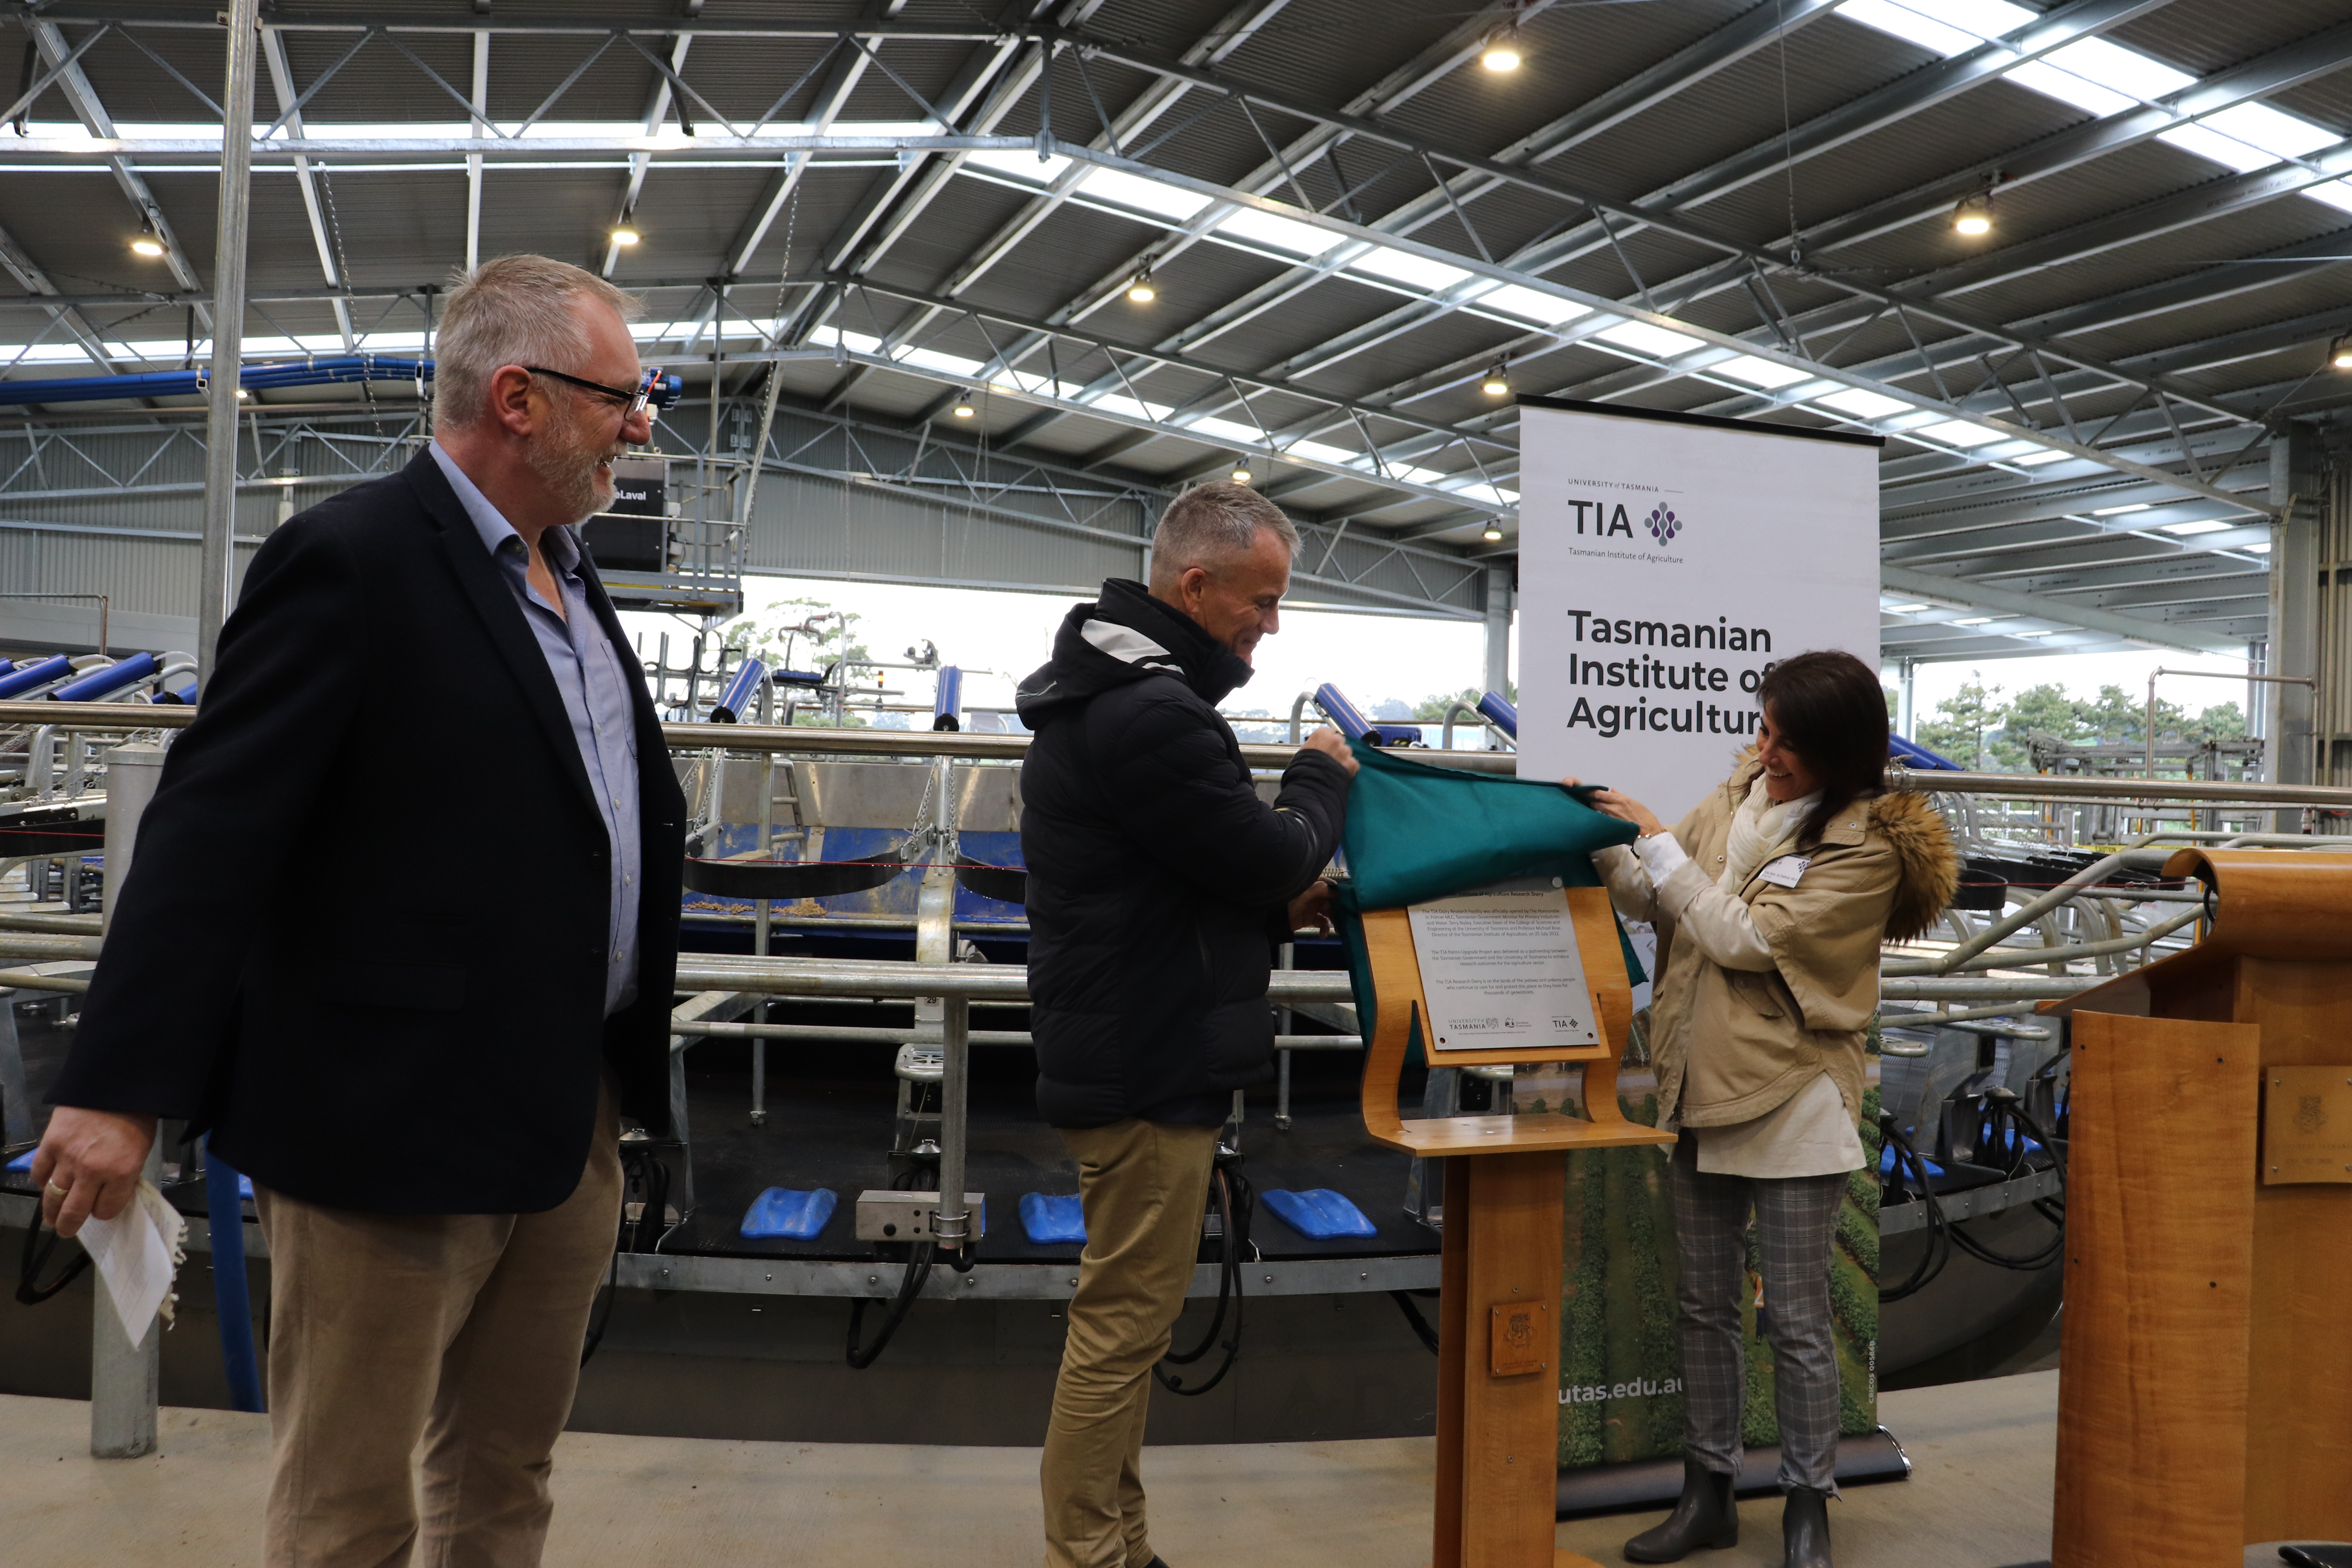 TIA Director Professor Mike Rose looks on as Terry Bailey, University of Tasmania Executive Dean - College of Sciences and Engineering, and the Honourable Jo Palmer Minister of Primary Industries and Water unveil the plaque at the new rotary dairy at TIA’s Dairy Research Facility at Elliott.